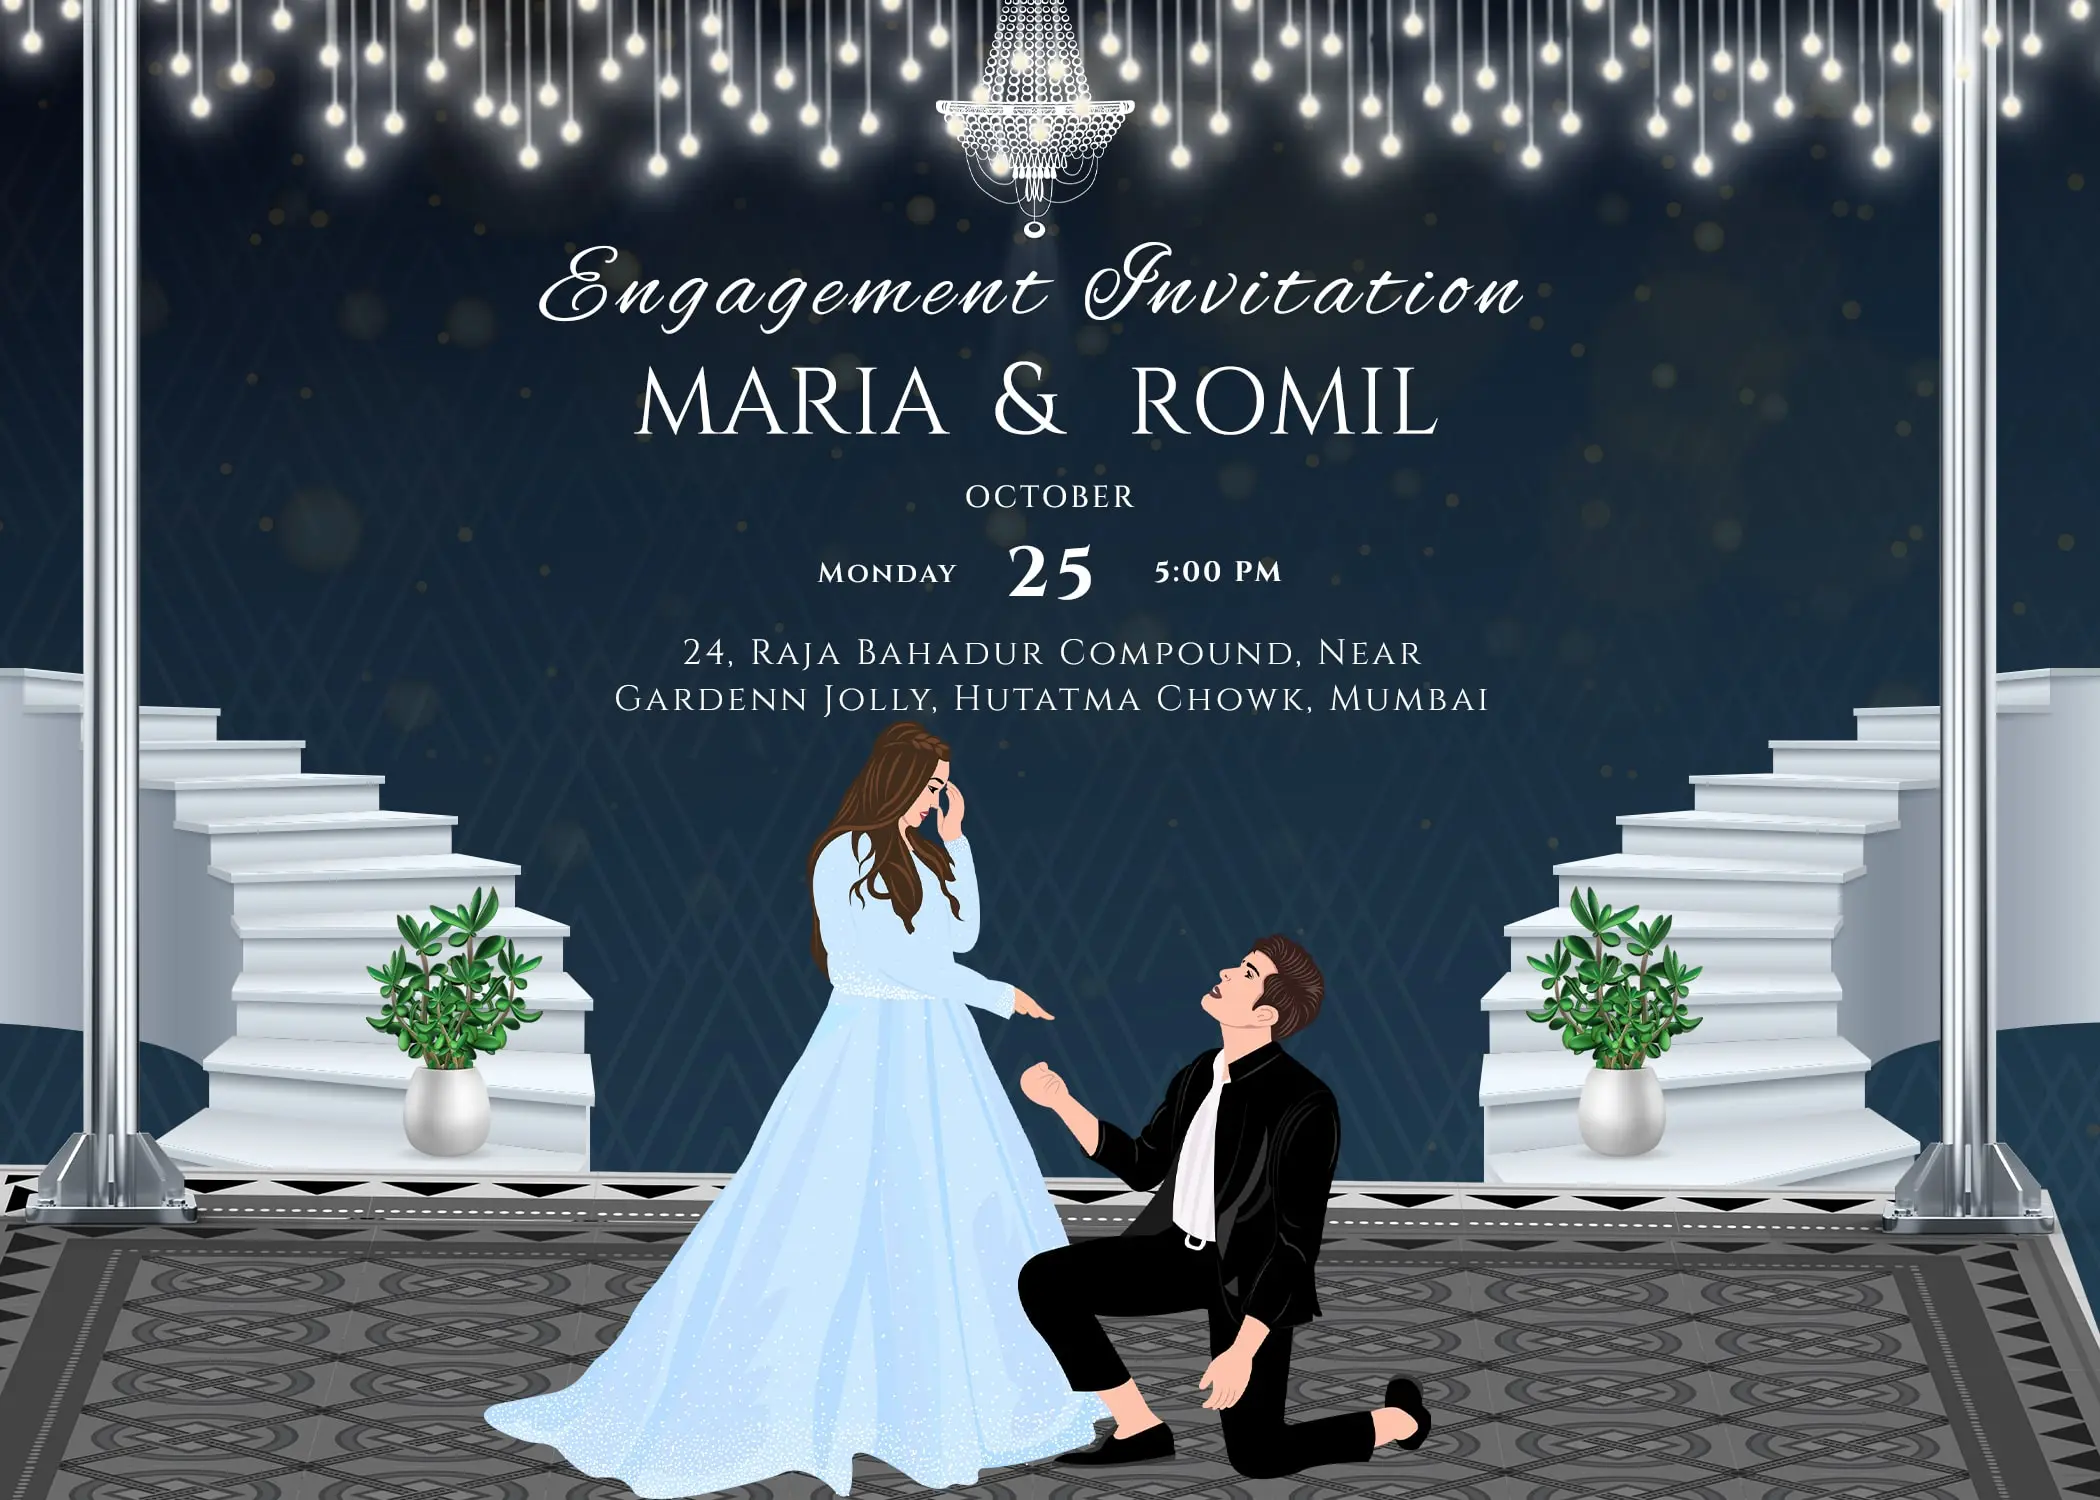 The Modern Trend: Going With Digital Wedding Invitations